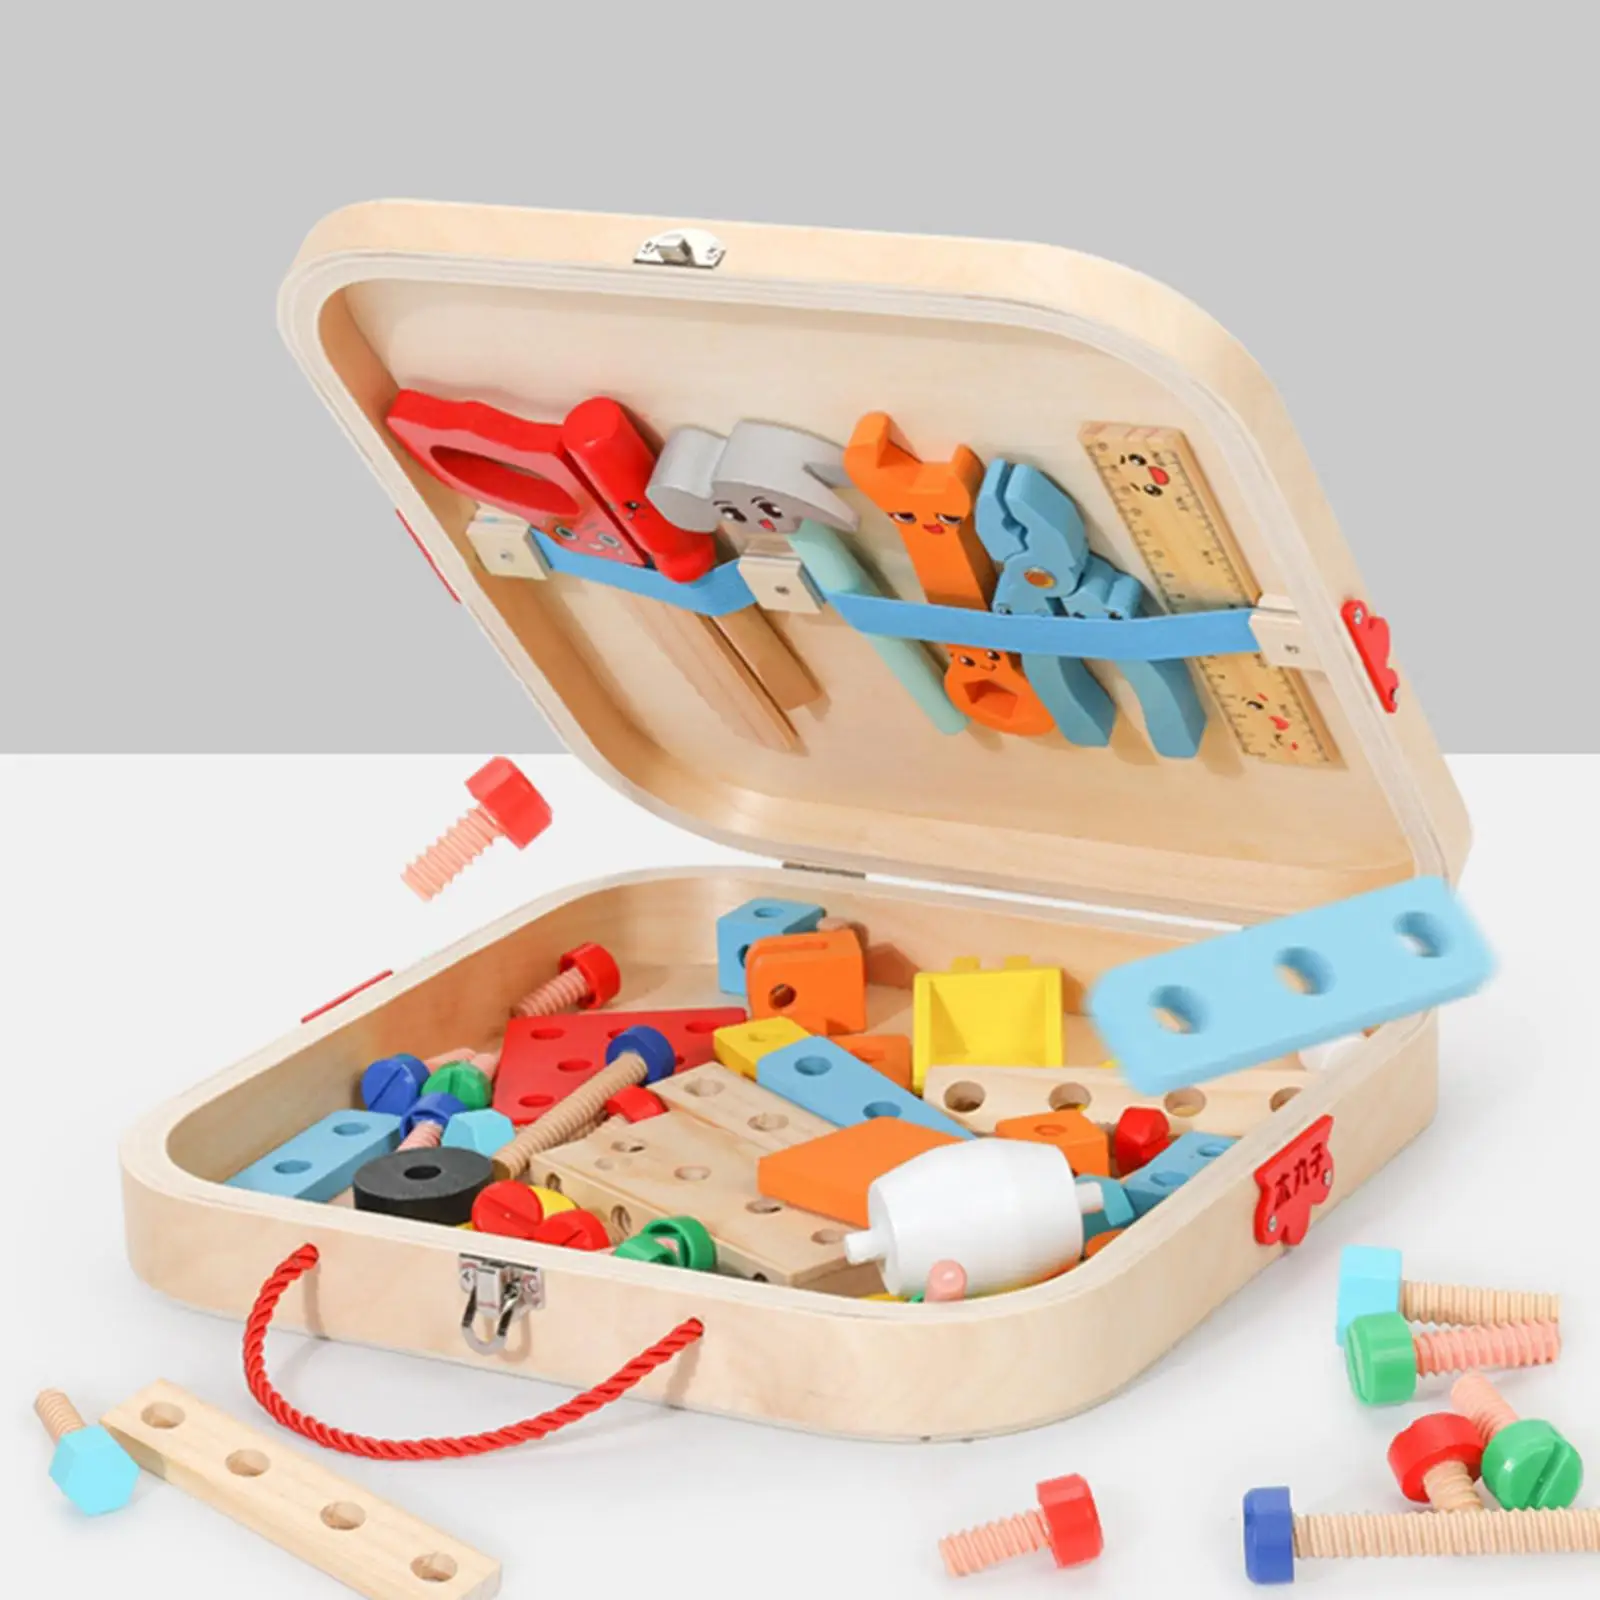 Wooden Kid Tool Set for Toddlers Develops Fine Motor Skills Multicolor Construction Tool Toy Set for Living Room Kids Toddlers